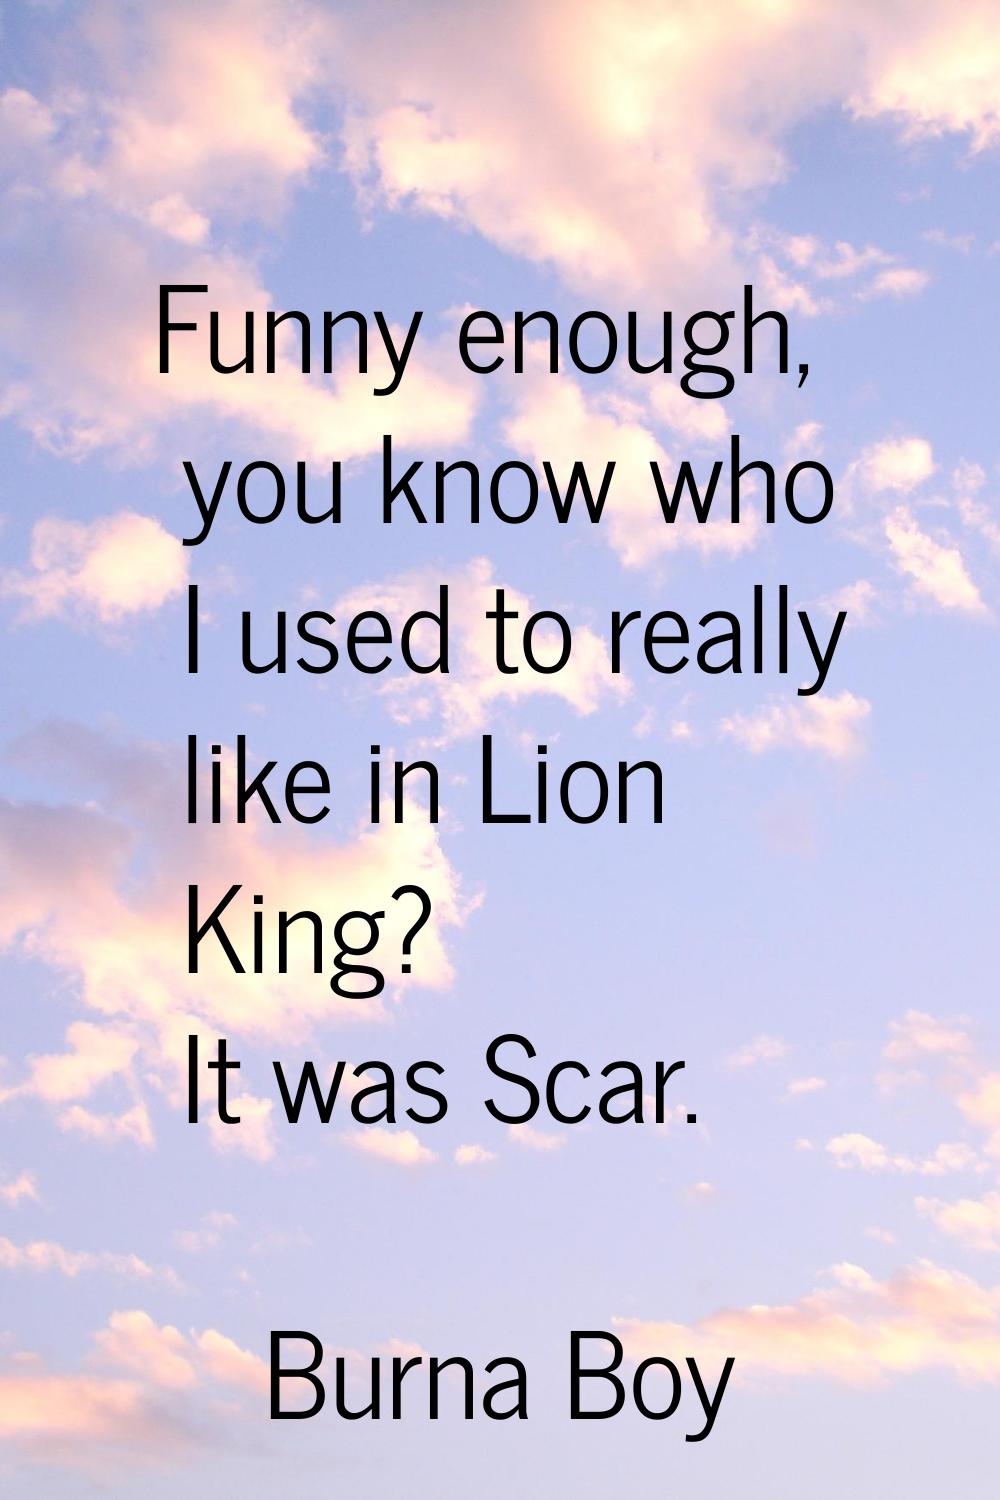 Funny enough, you know who I used to really like in Lion King? It was Scar.